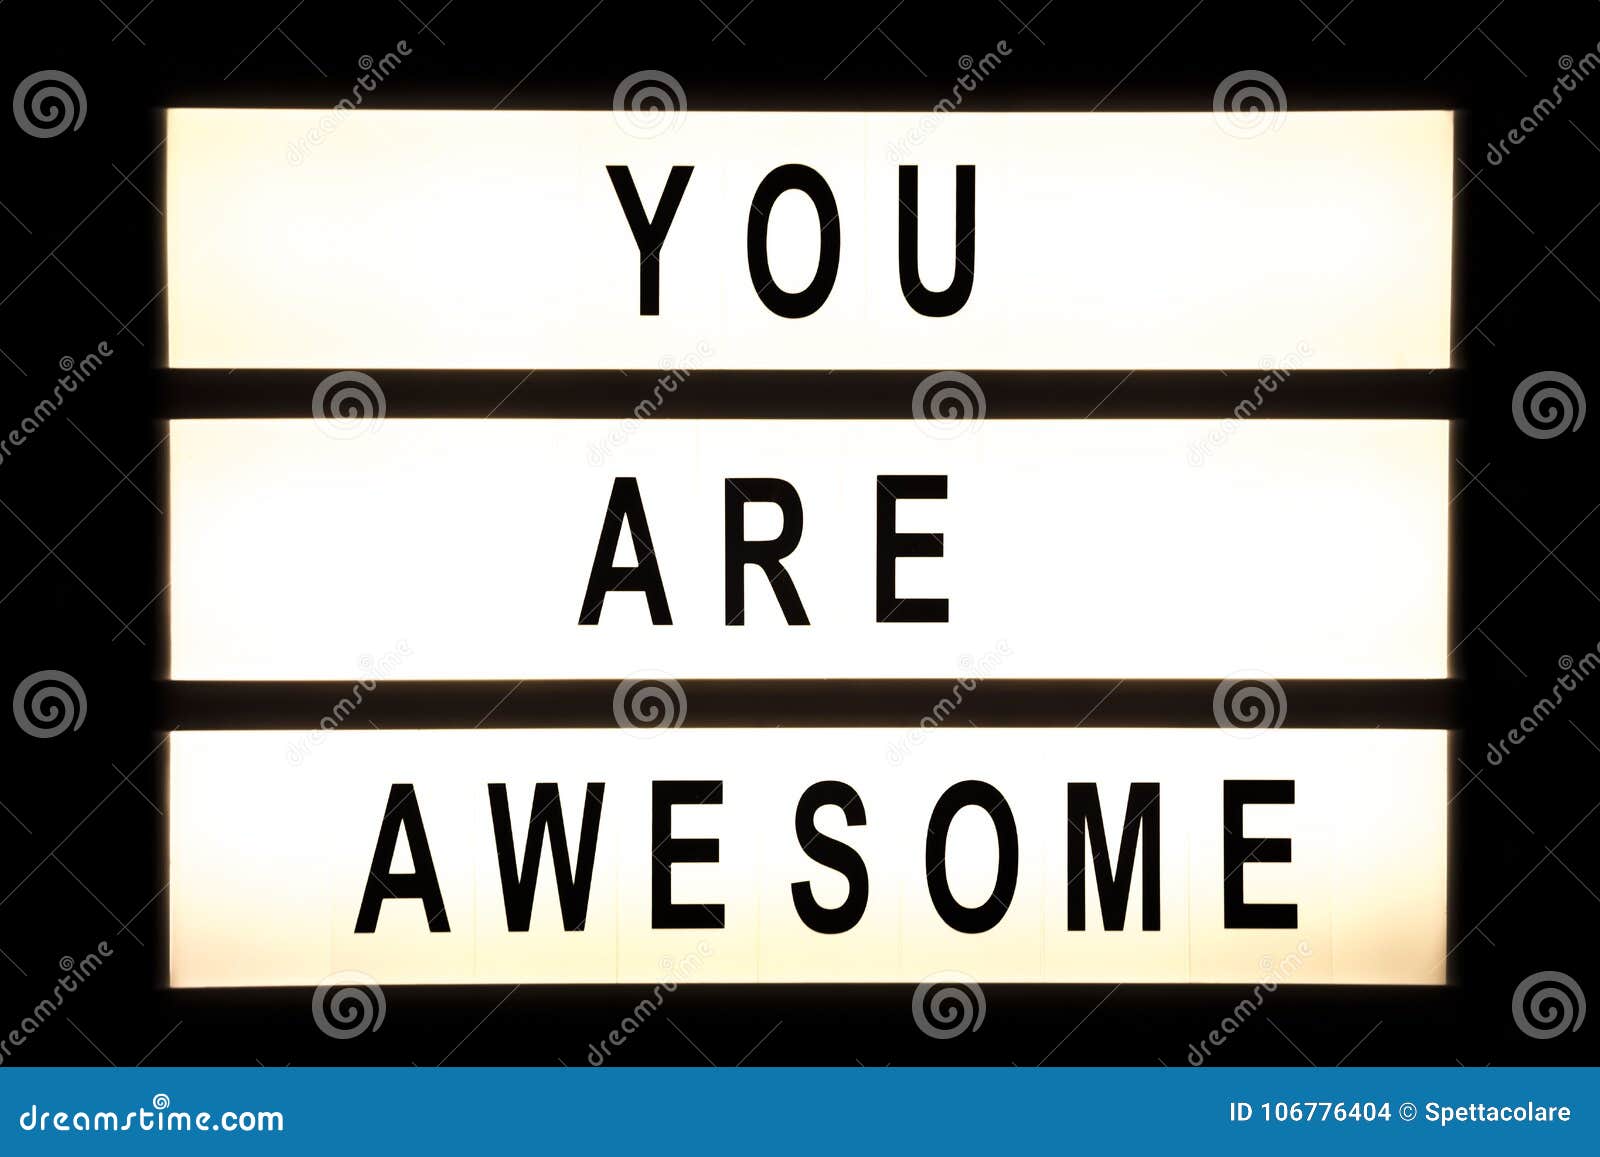 you are awesome hanging light box